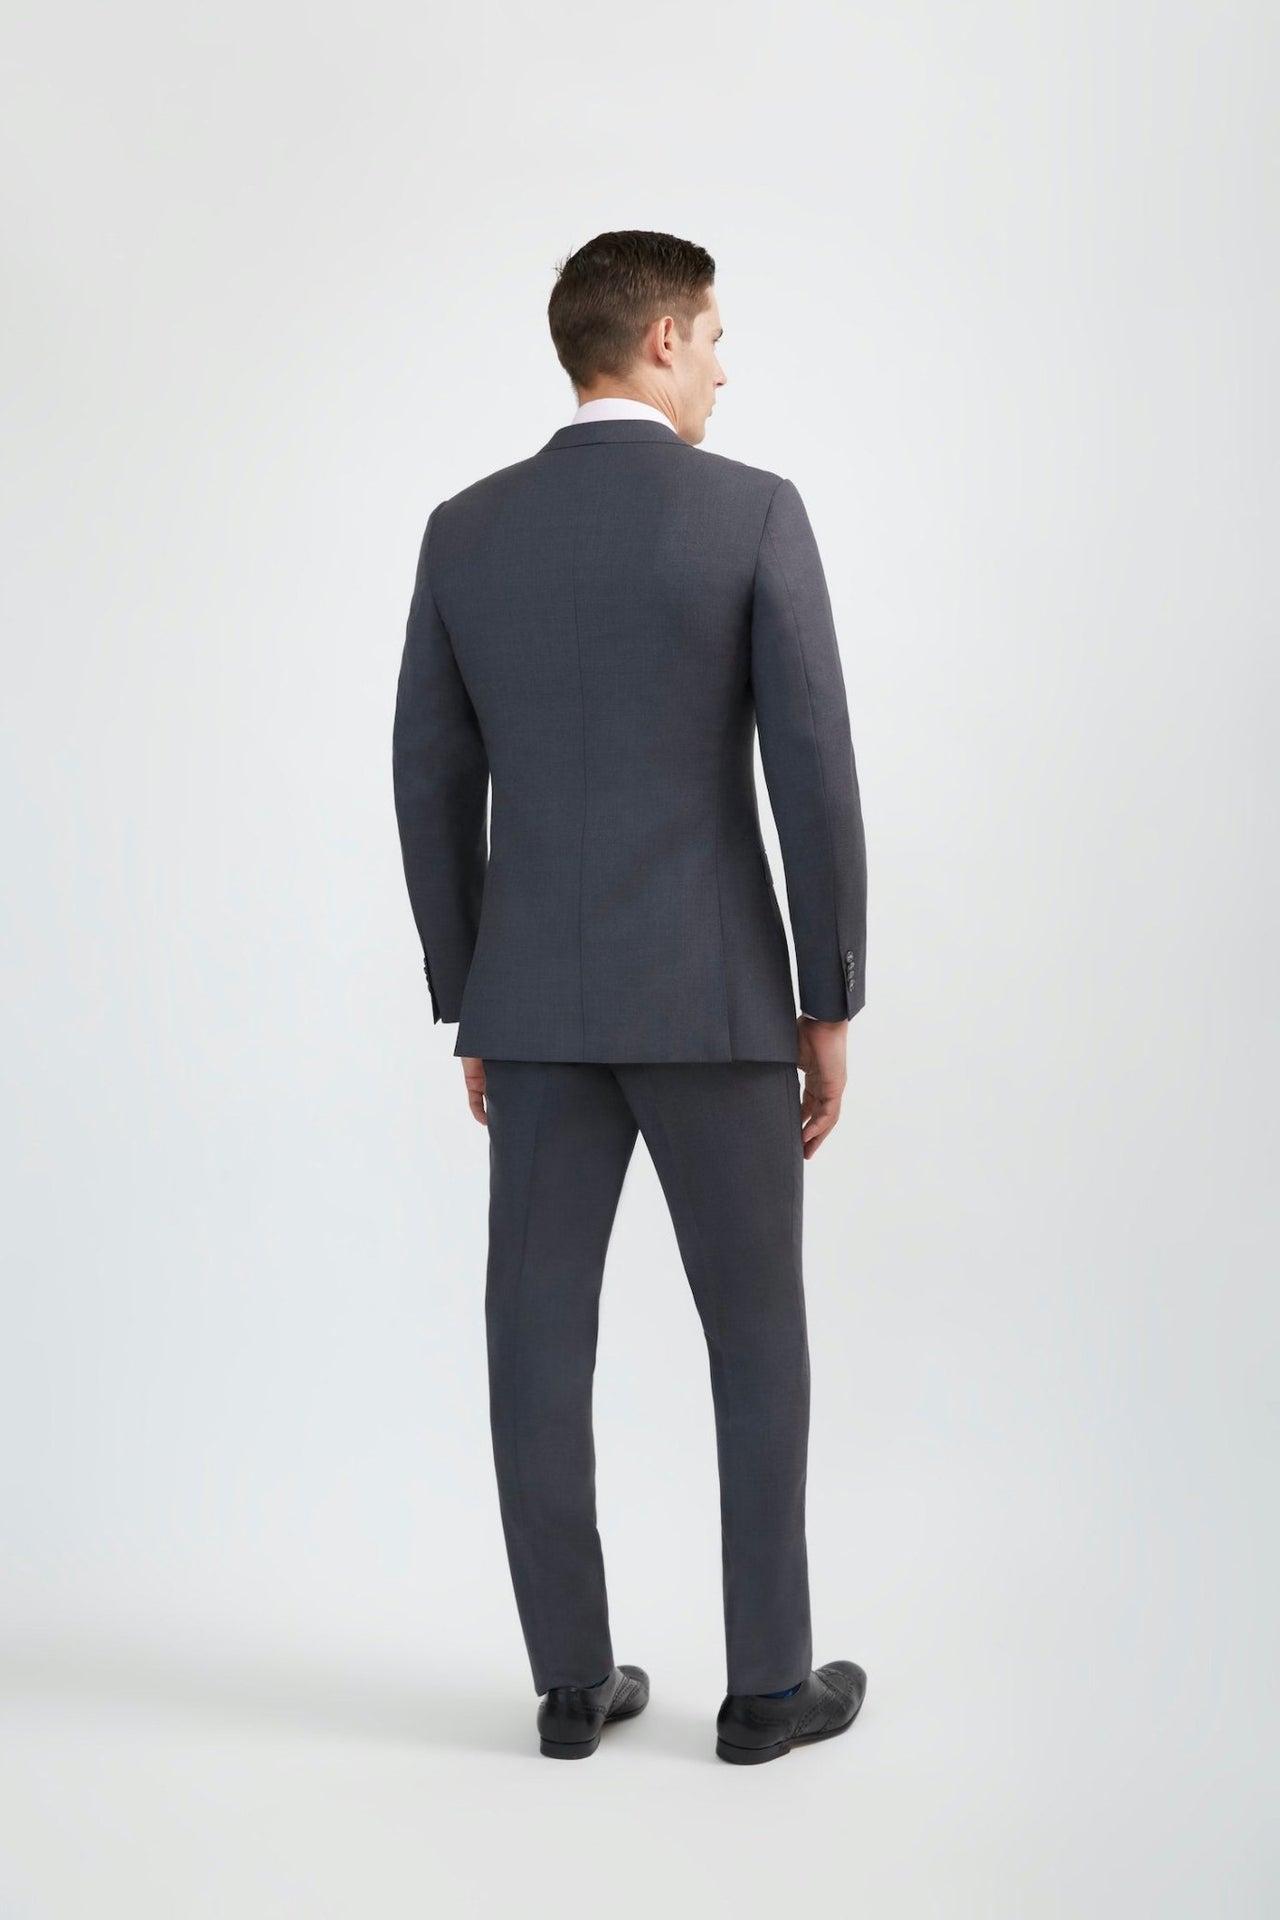 Textured Blue/Grey/Black Suit | Buy Online Custom Tailored Suits & Shirts  for Men | Canada | Suit Up! Tailors